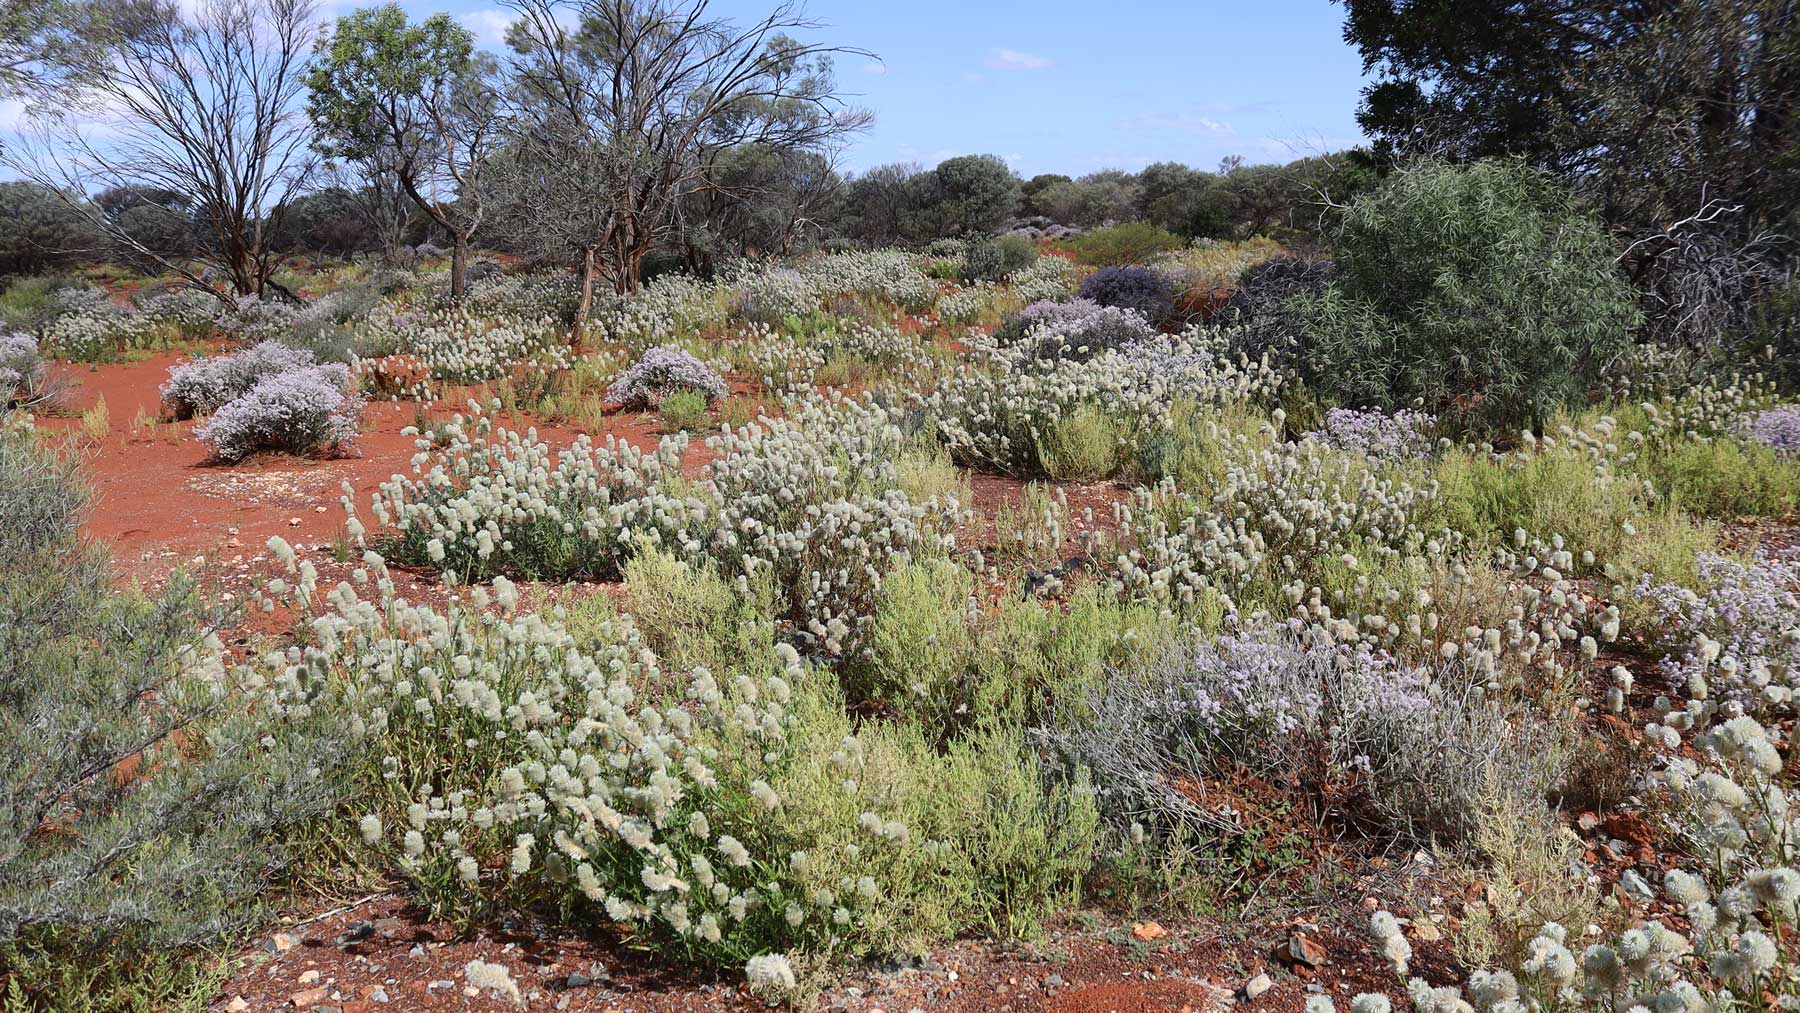 Flowering shrubs and bushes in the outback